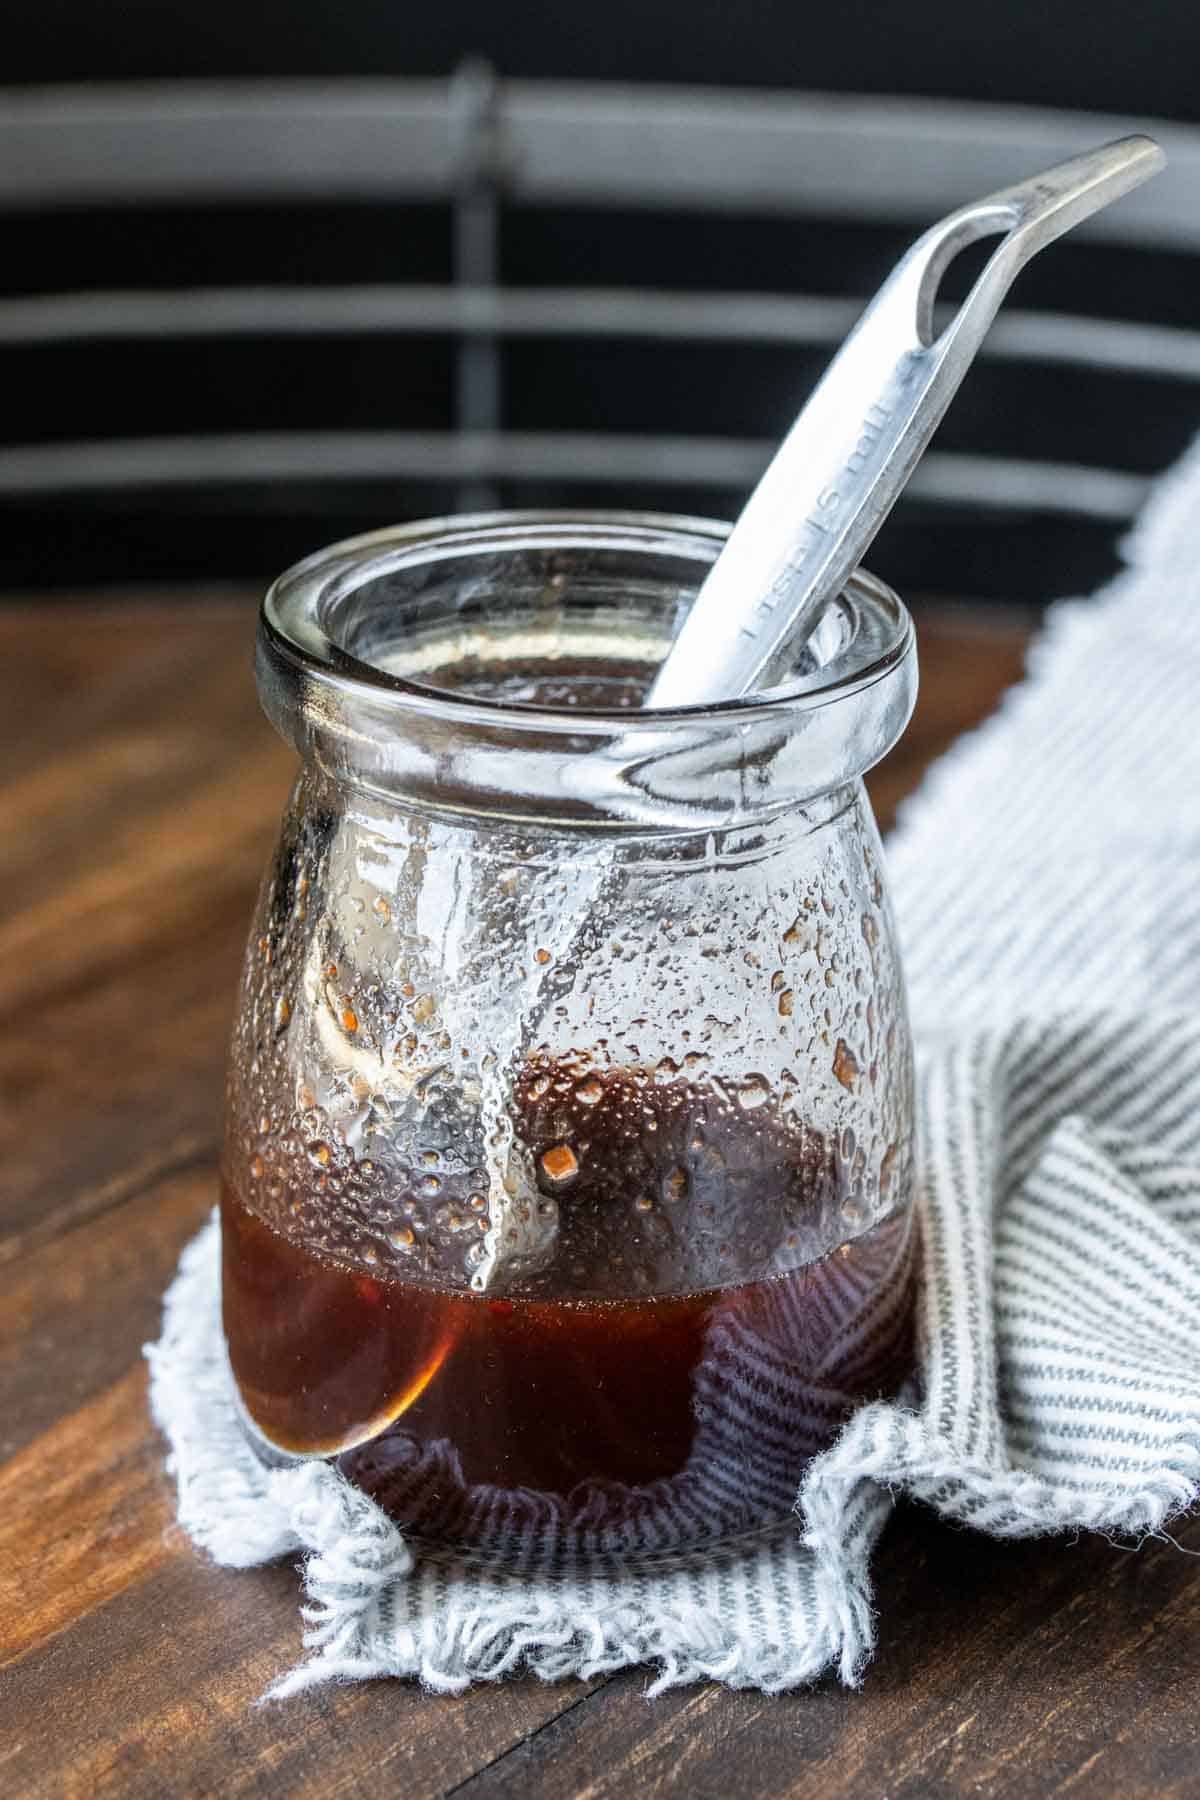 Measuring spoon in a glass bowl of maple syrup sauce